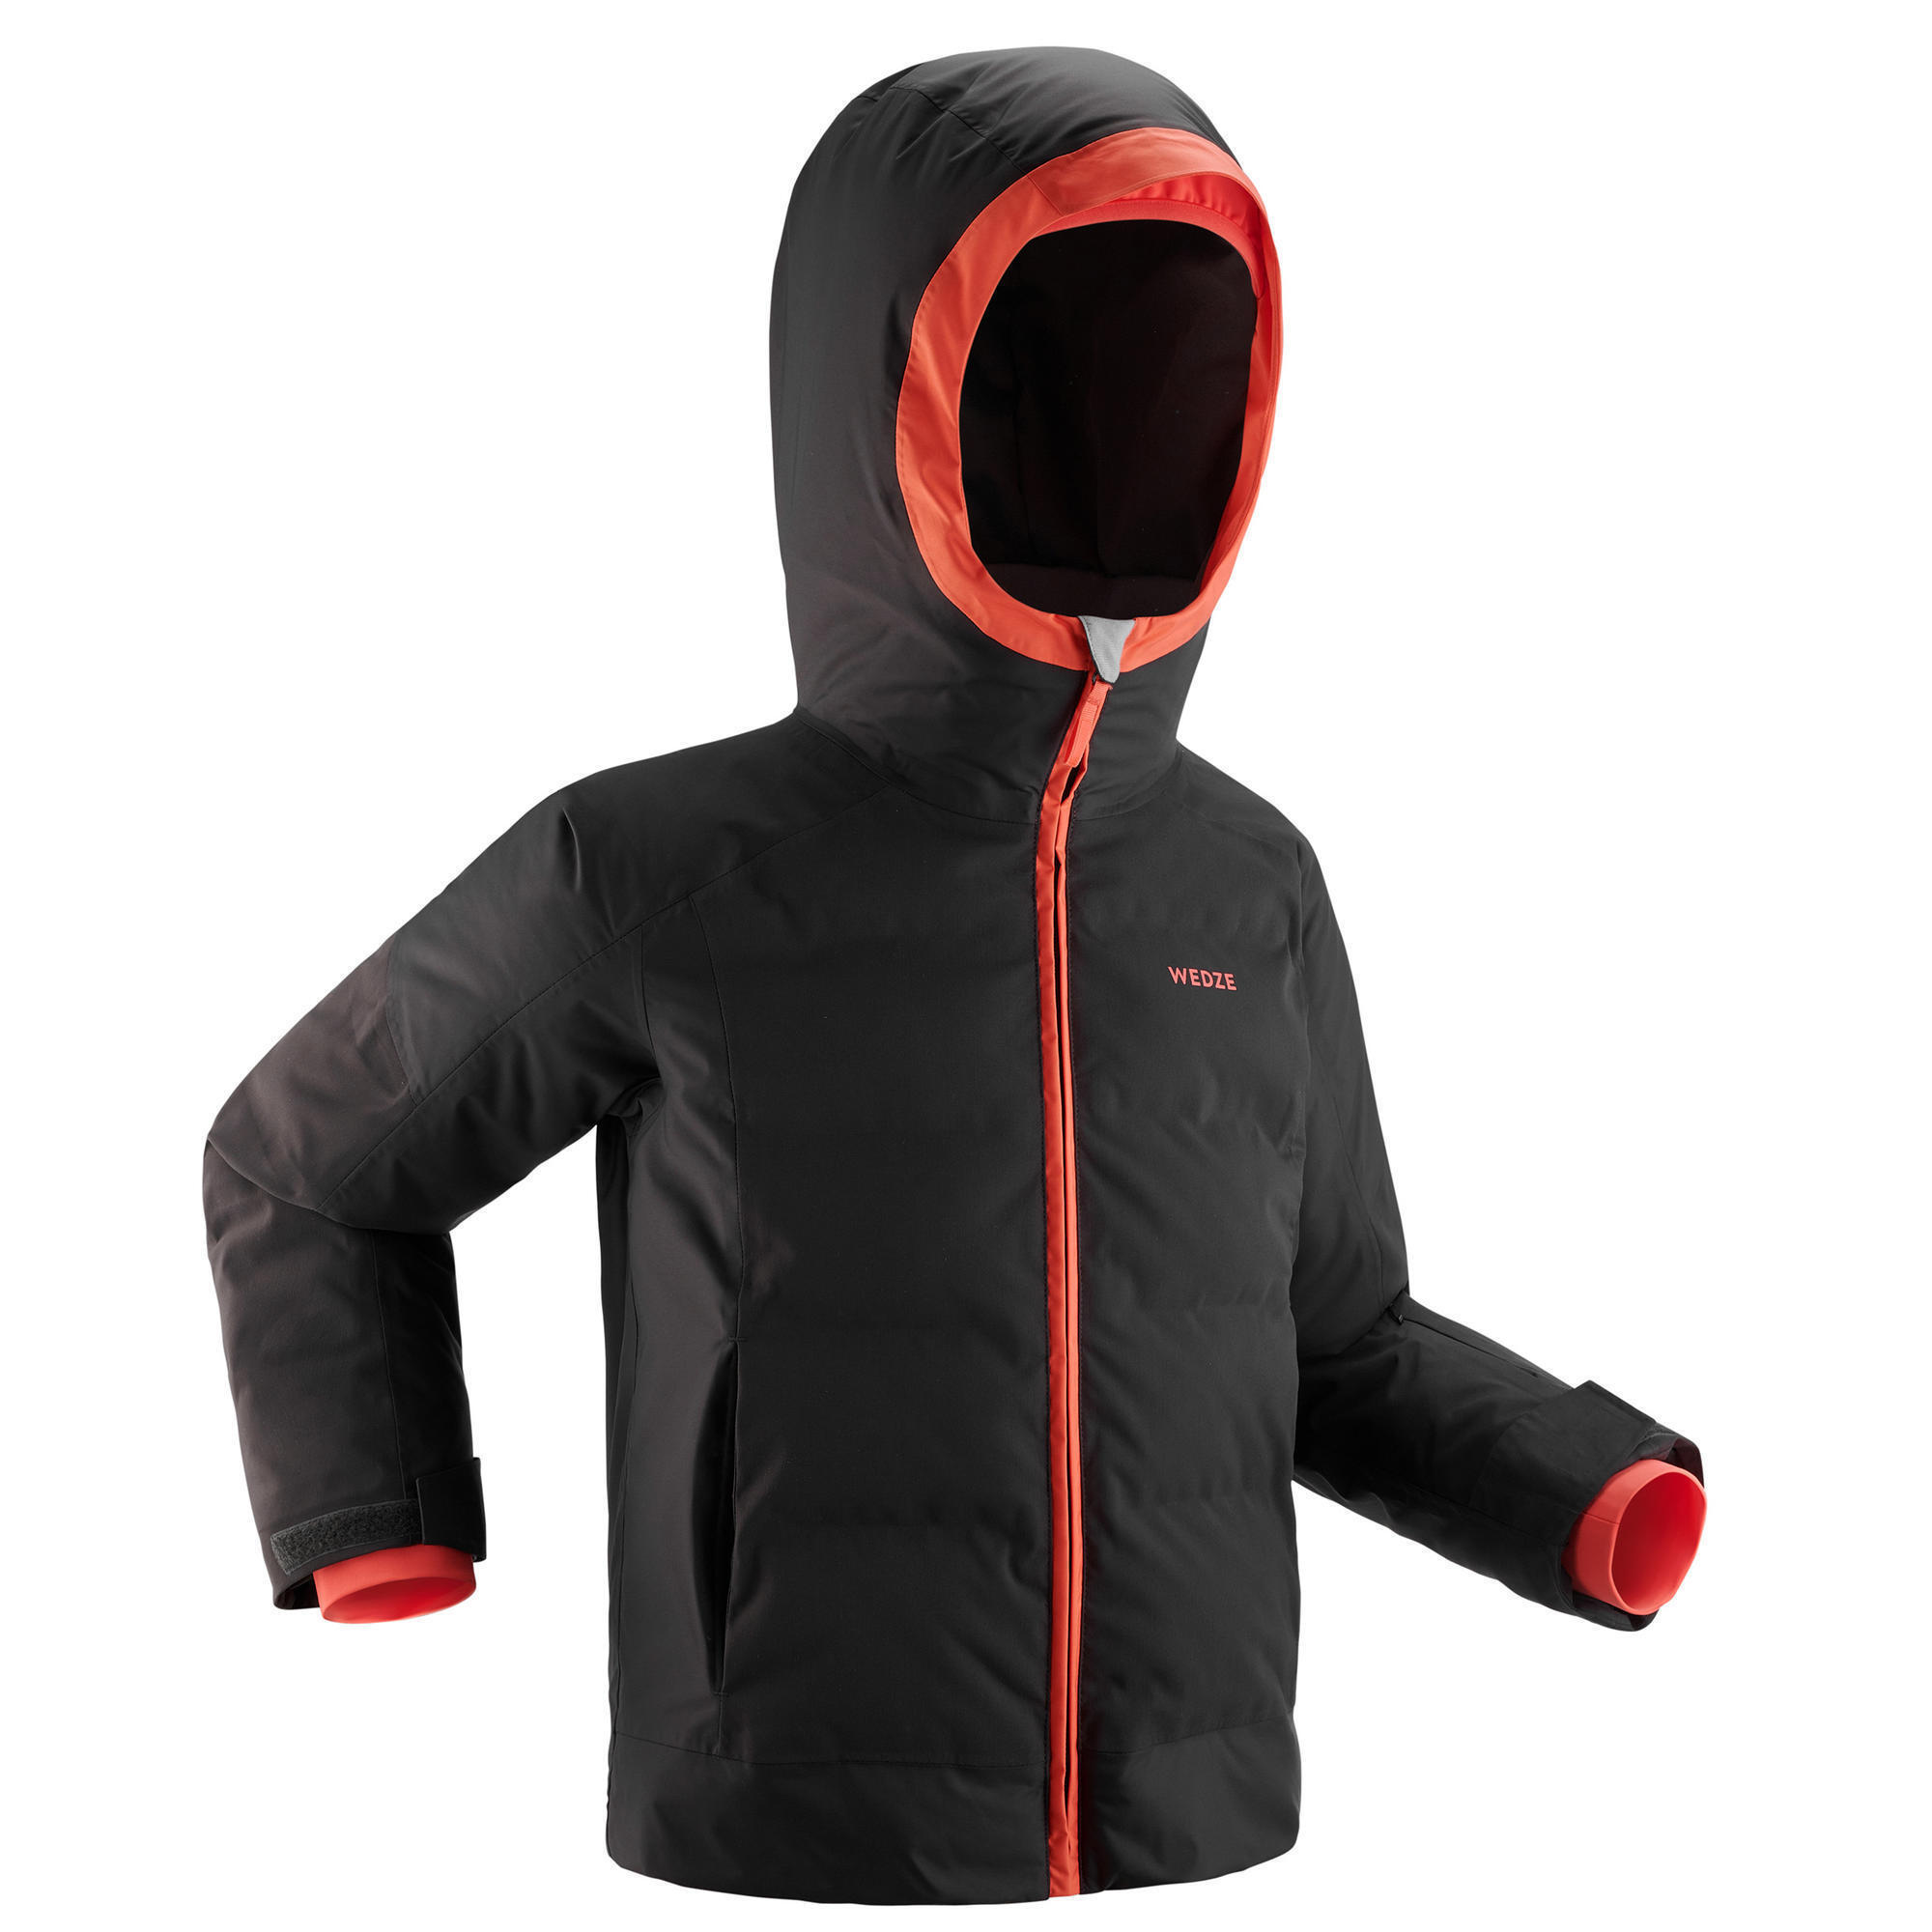 WEDZE KIDS’ EXTRA WARM AND WATERPROOF PADDED SKI JACKET - 580 WARM GREY AND CORAL